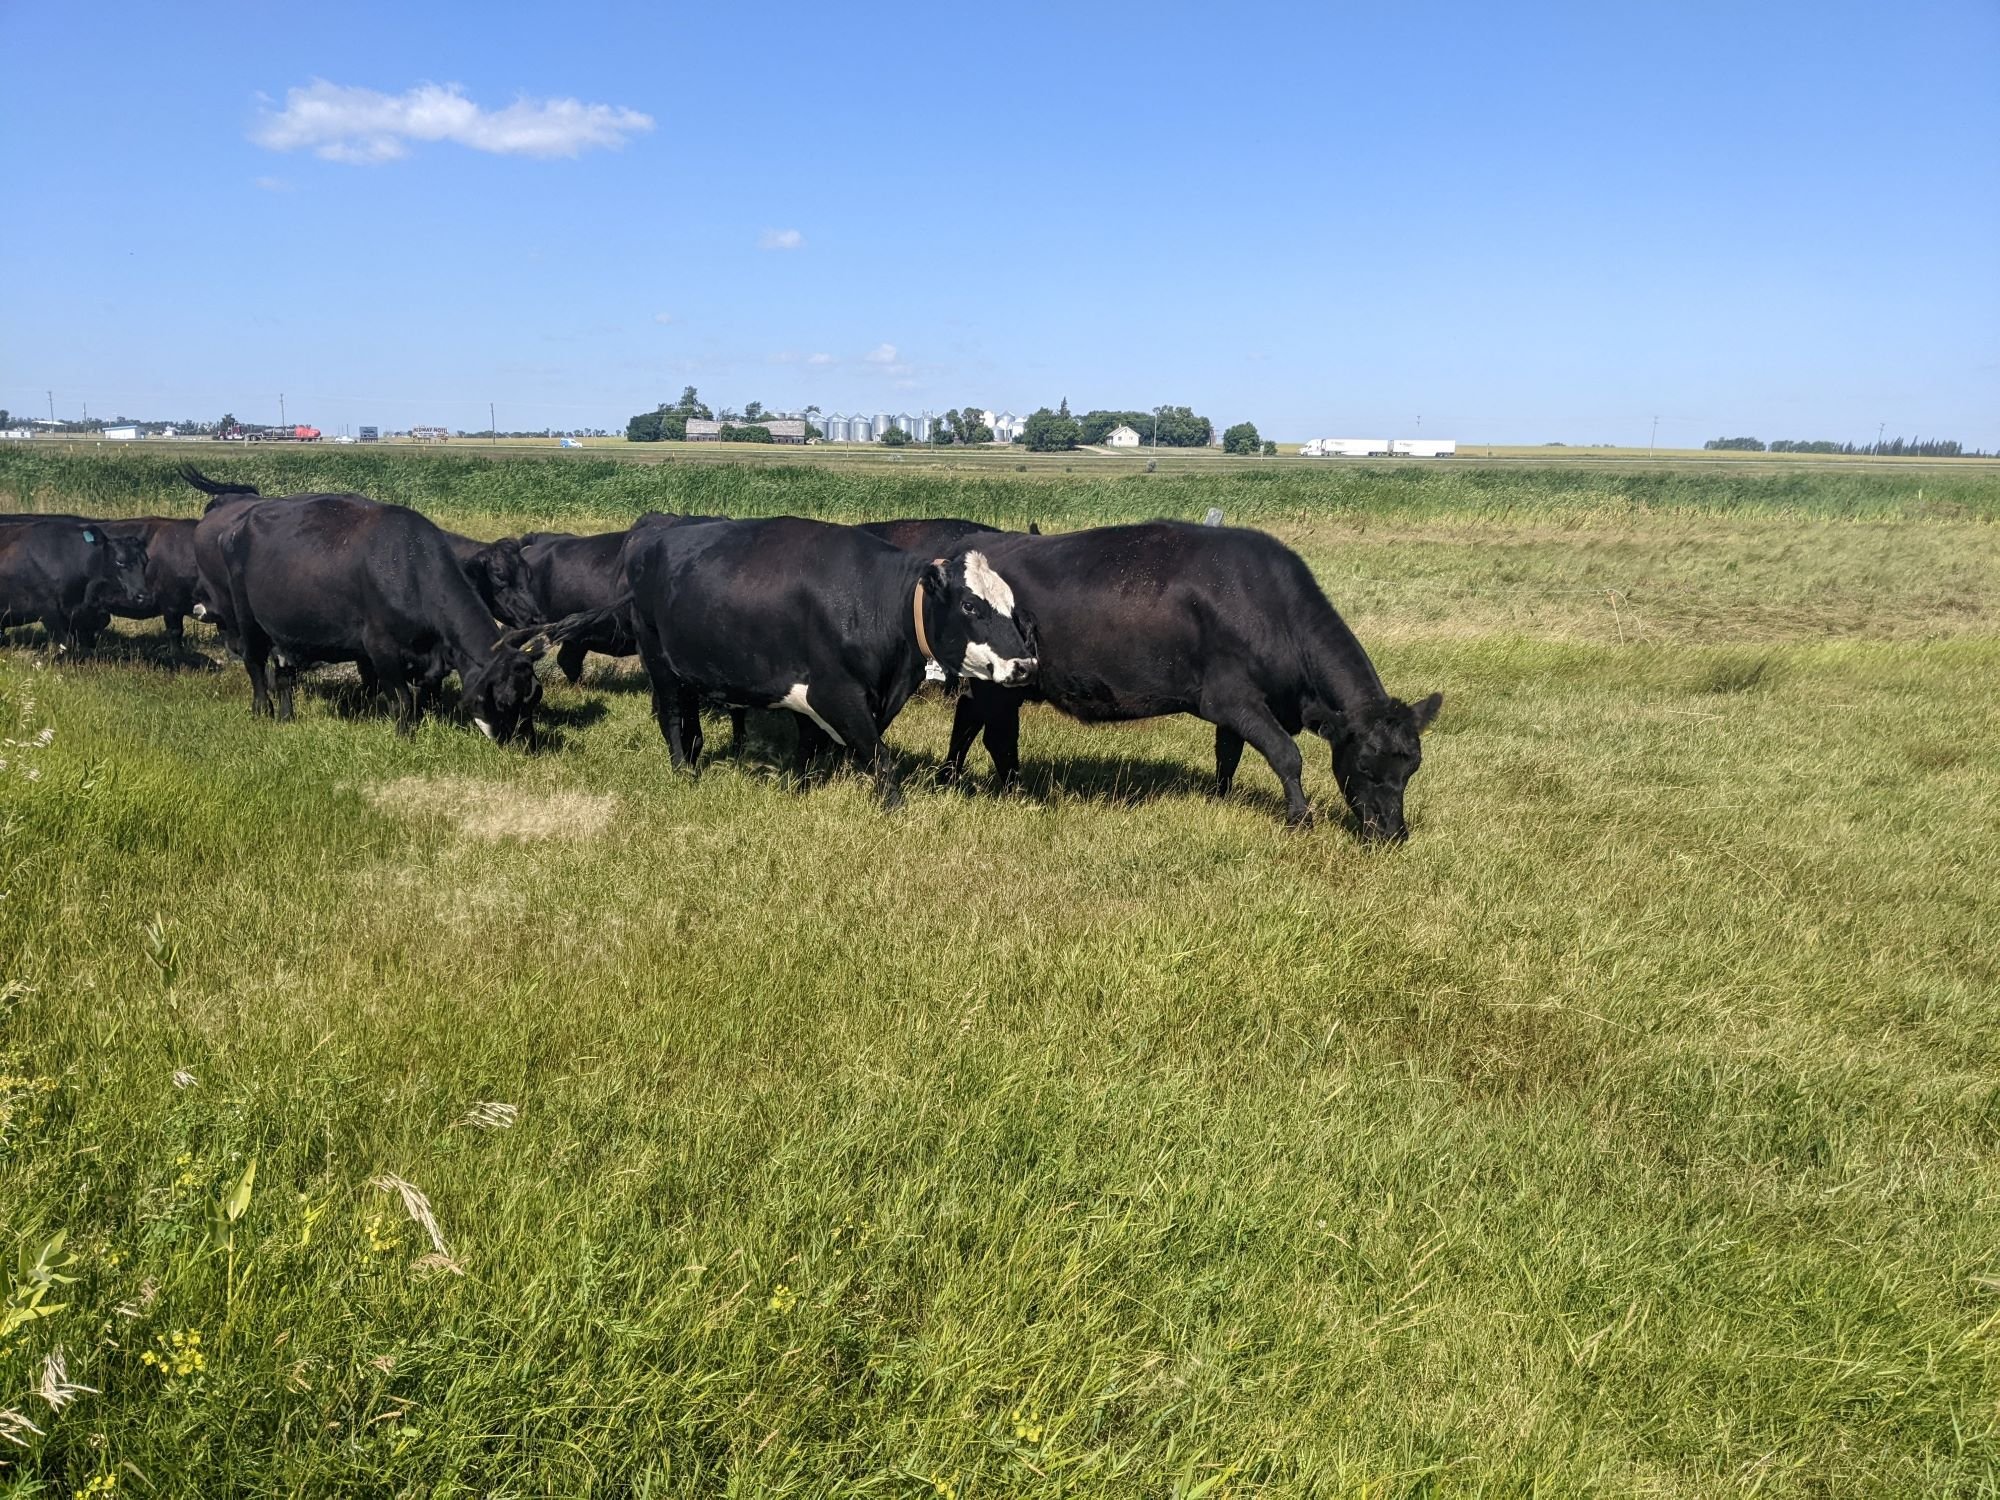 Grazing herd at First Street Pasture. One cow has a collar to collect GPS coordinates